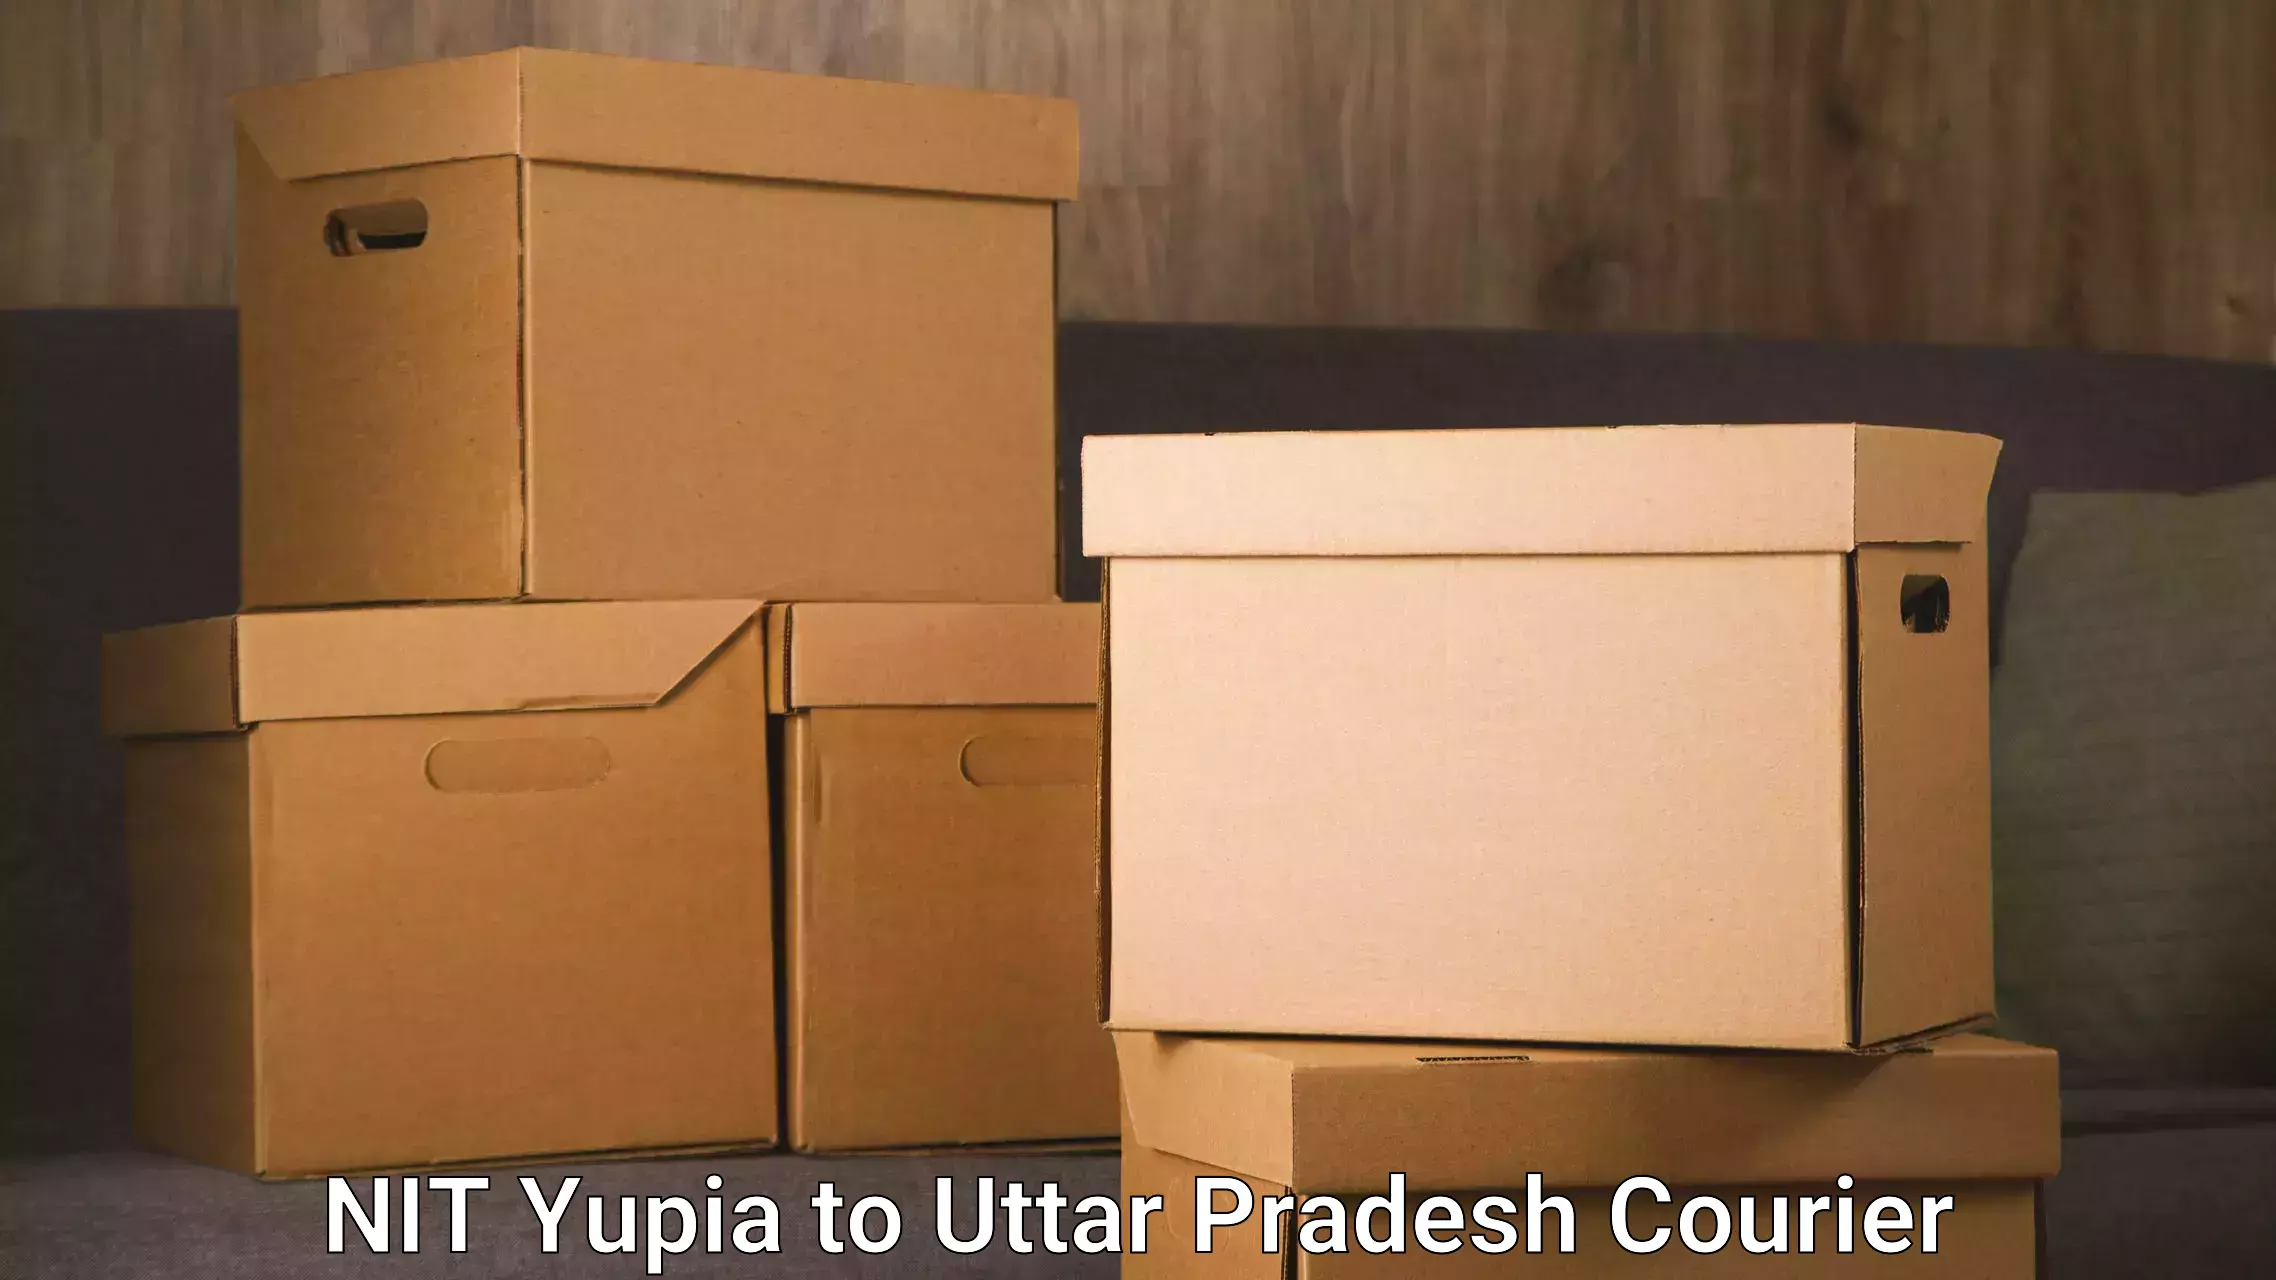 Tech-enabled shipping in NIT Yupia to Allahabad